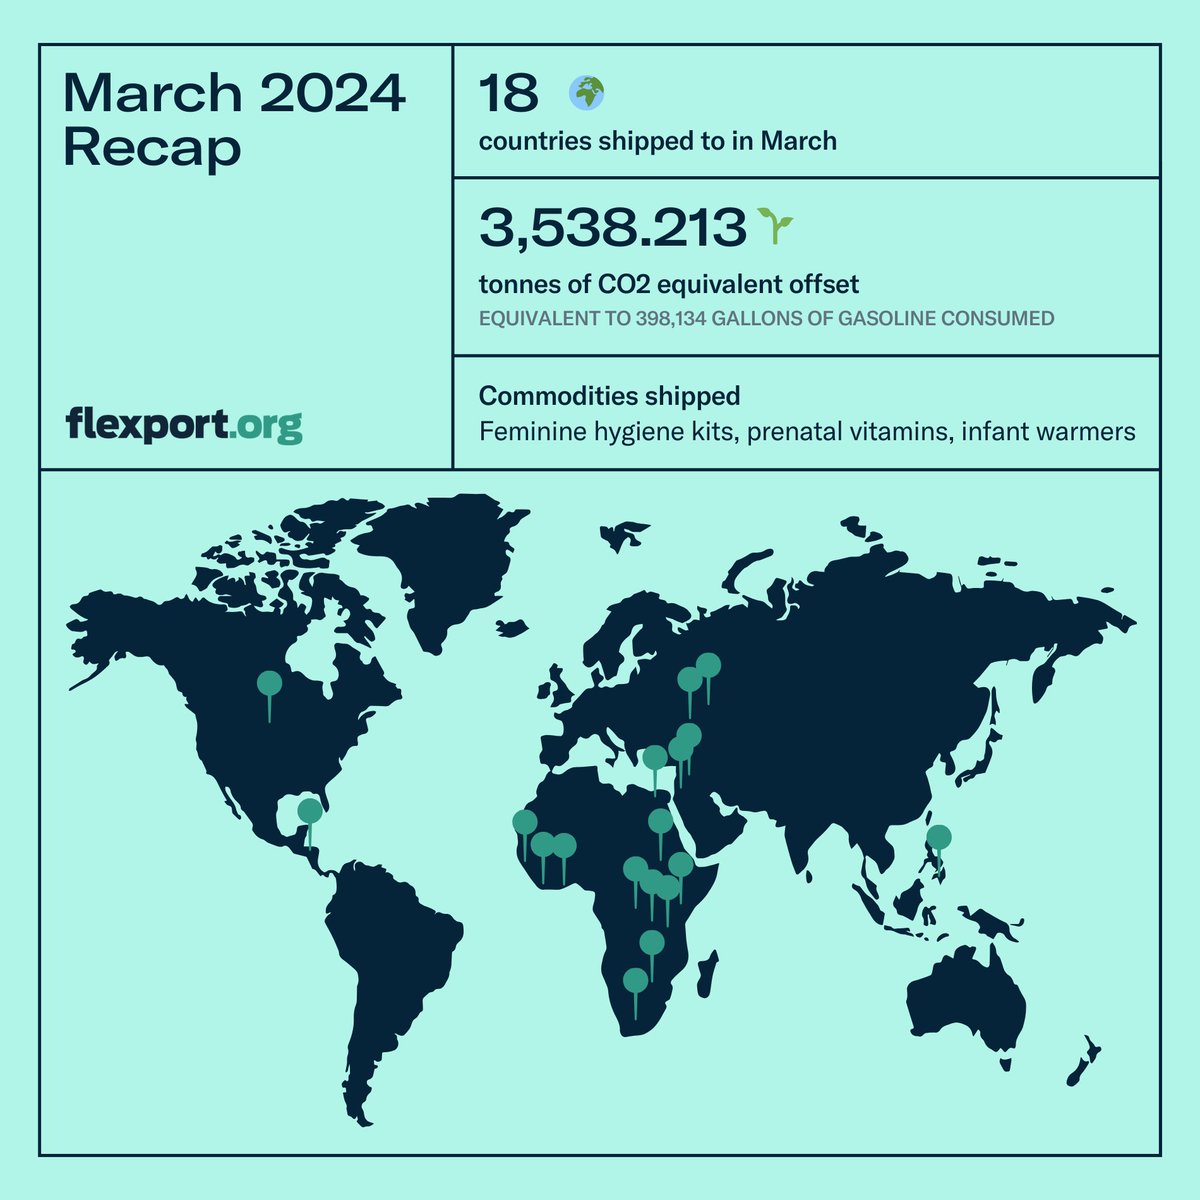 In March, Flexport.org’s humanitarian aid delivery included items supporting refugees, long-term development projects, and crisis relief. Learn more about how the team uses logistics as a positive force for social and environmental impact at Flexport.org.